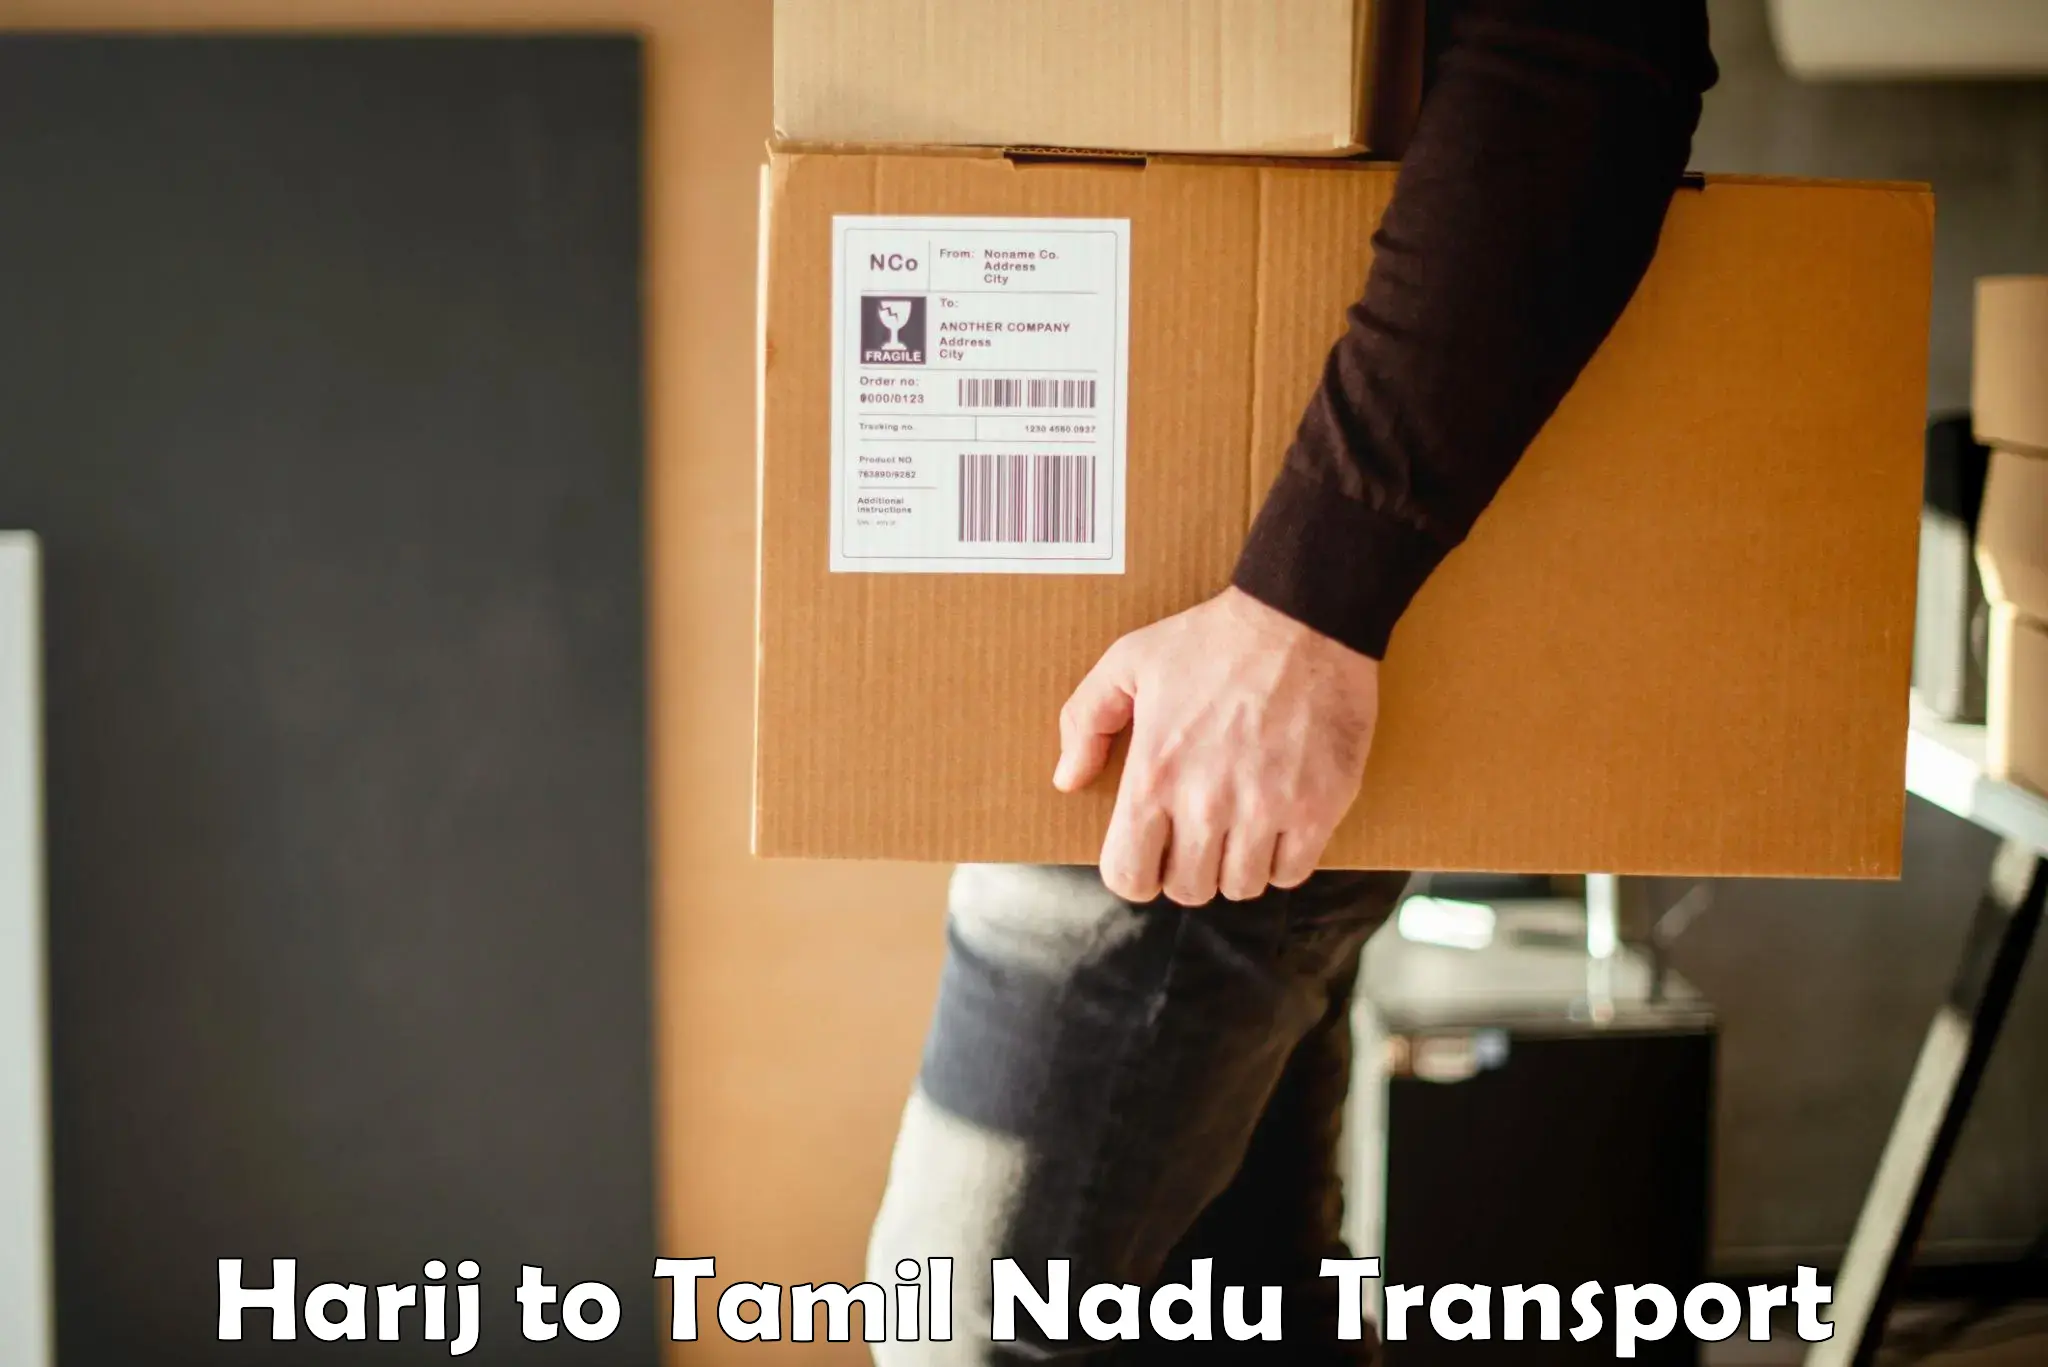 Express transport services Harij to Coimbatore